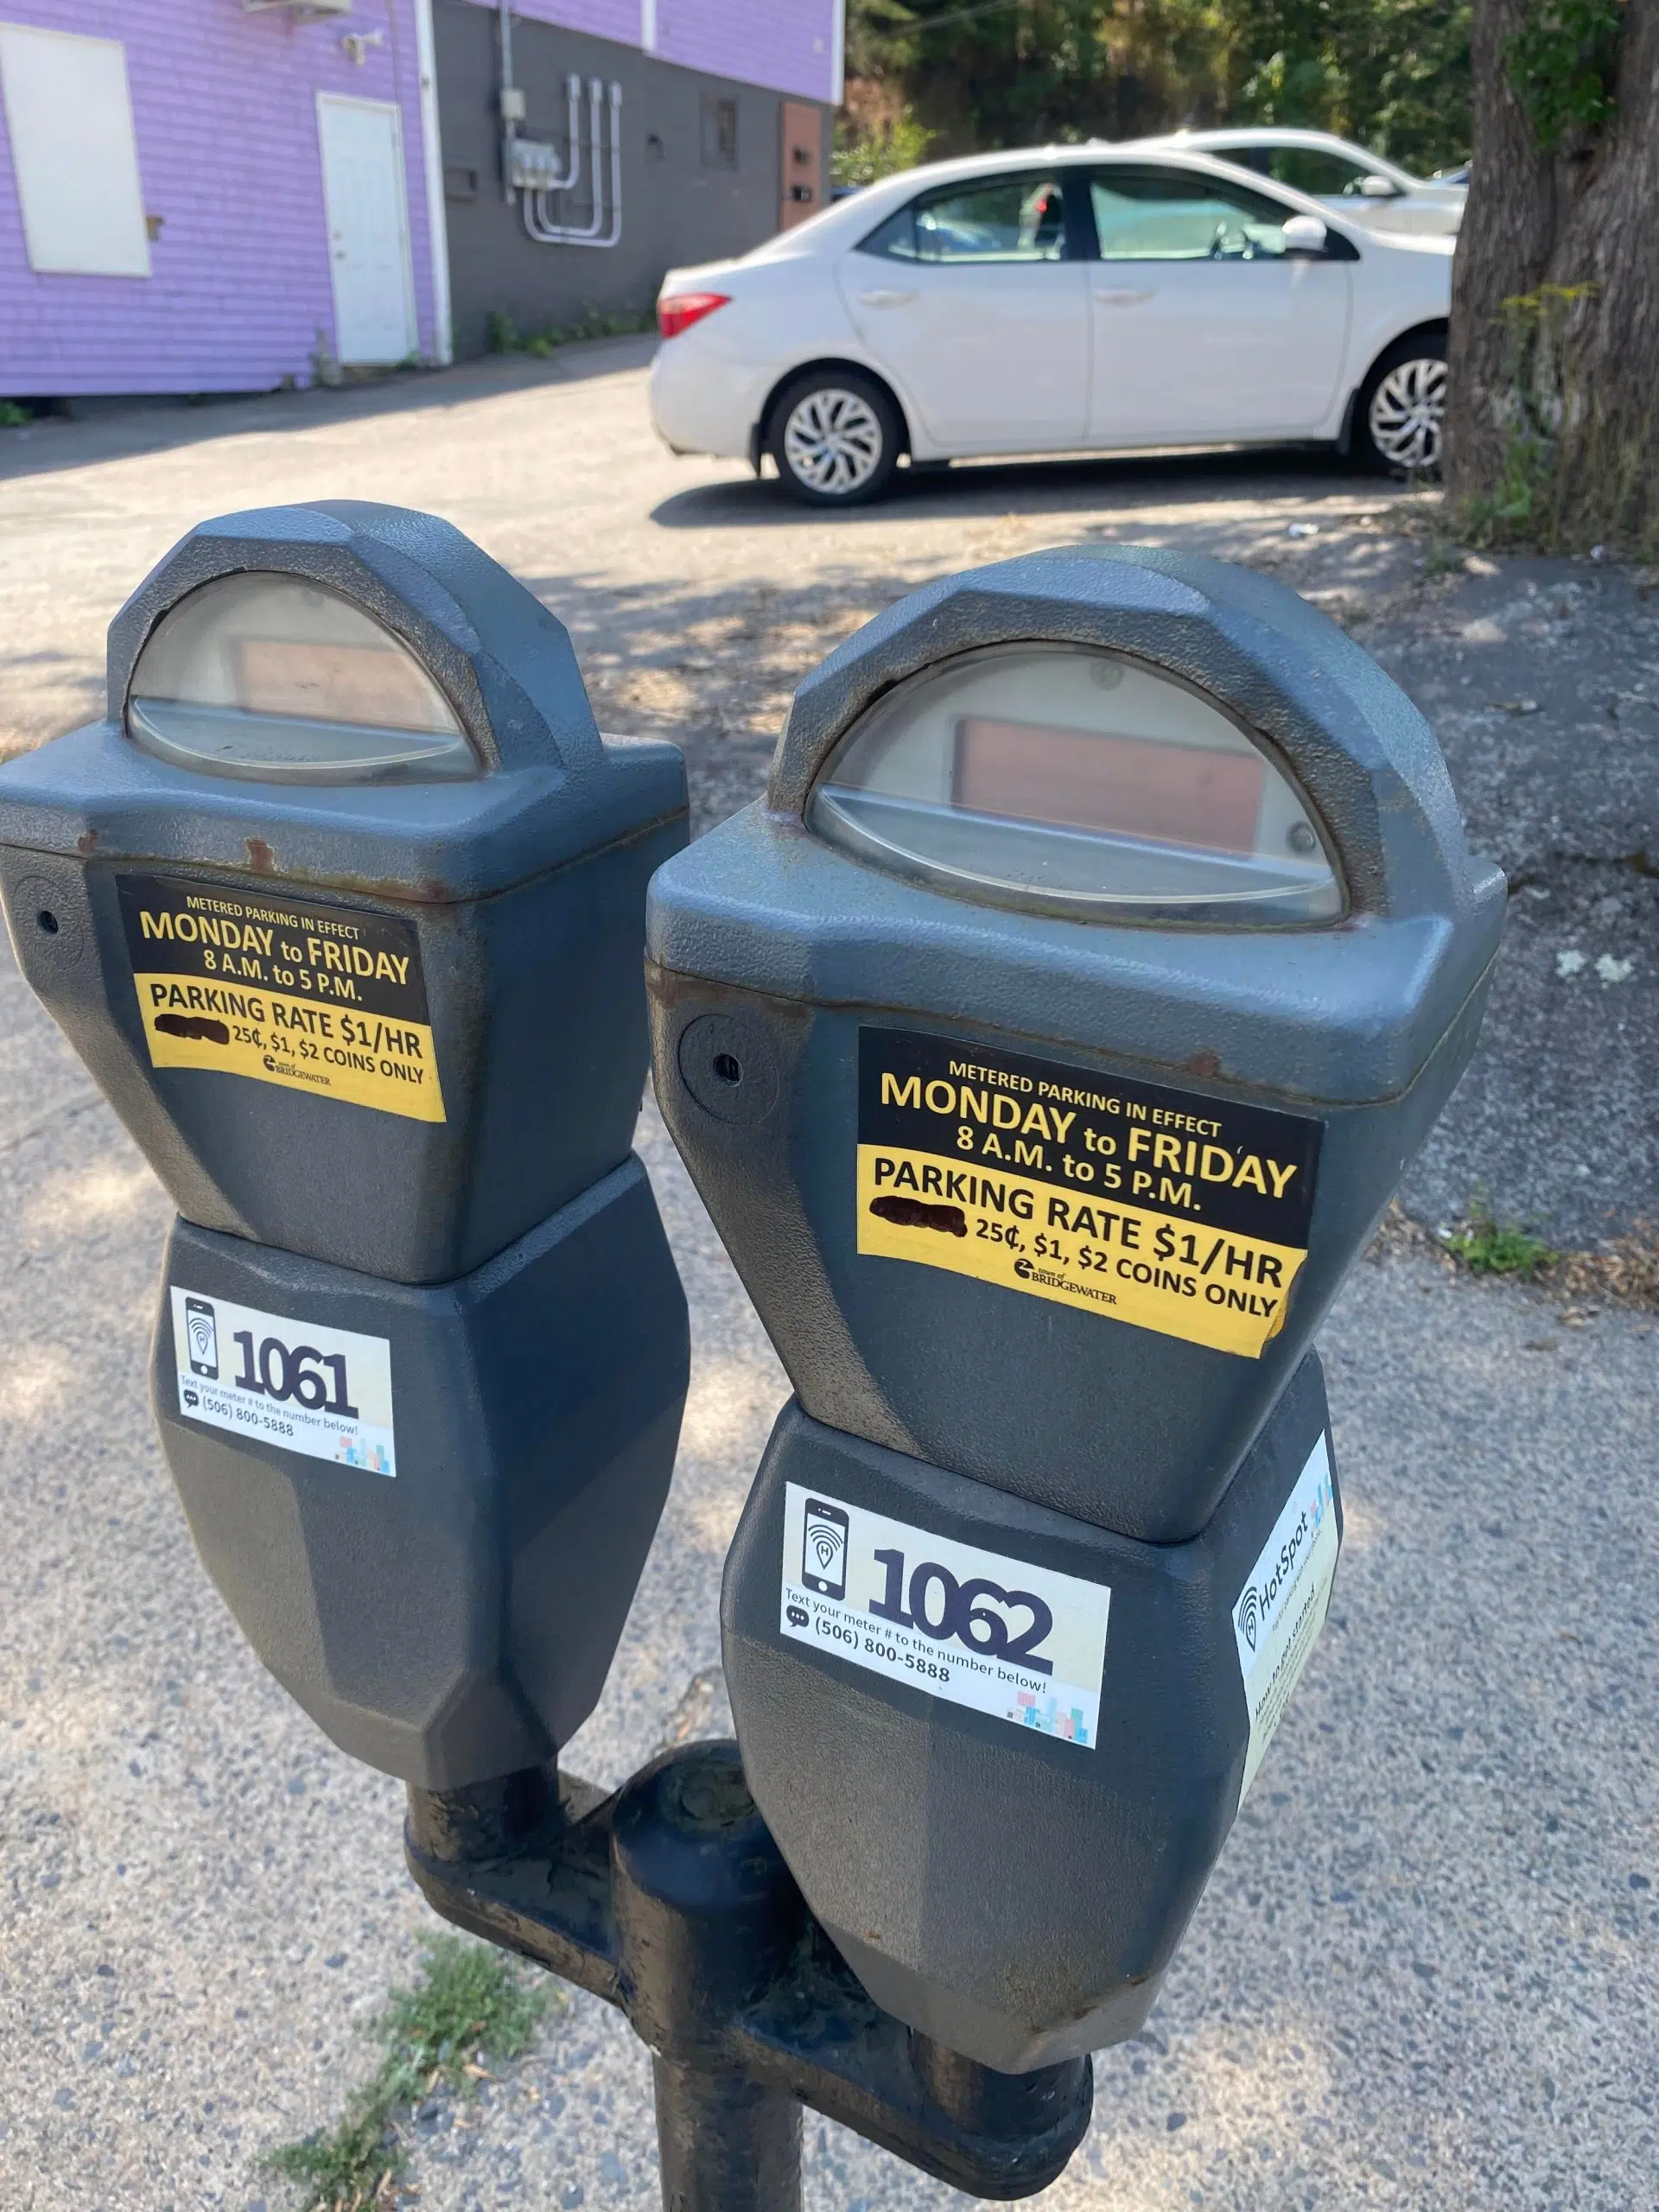 Bridgewater Parking meters phase out nickels and dimes